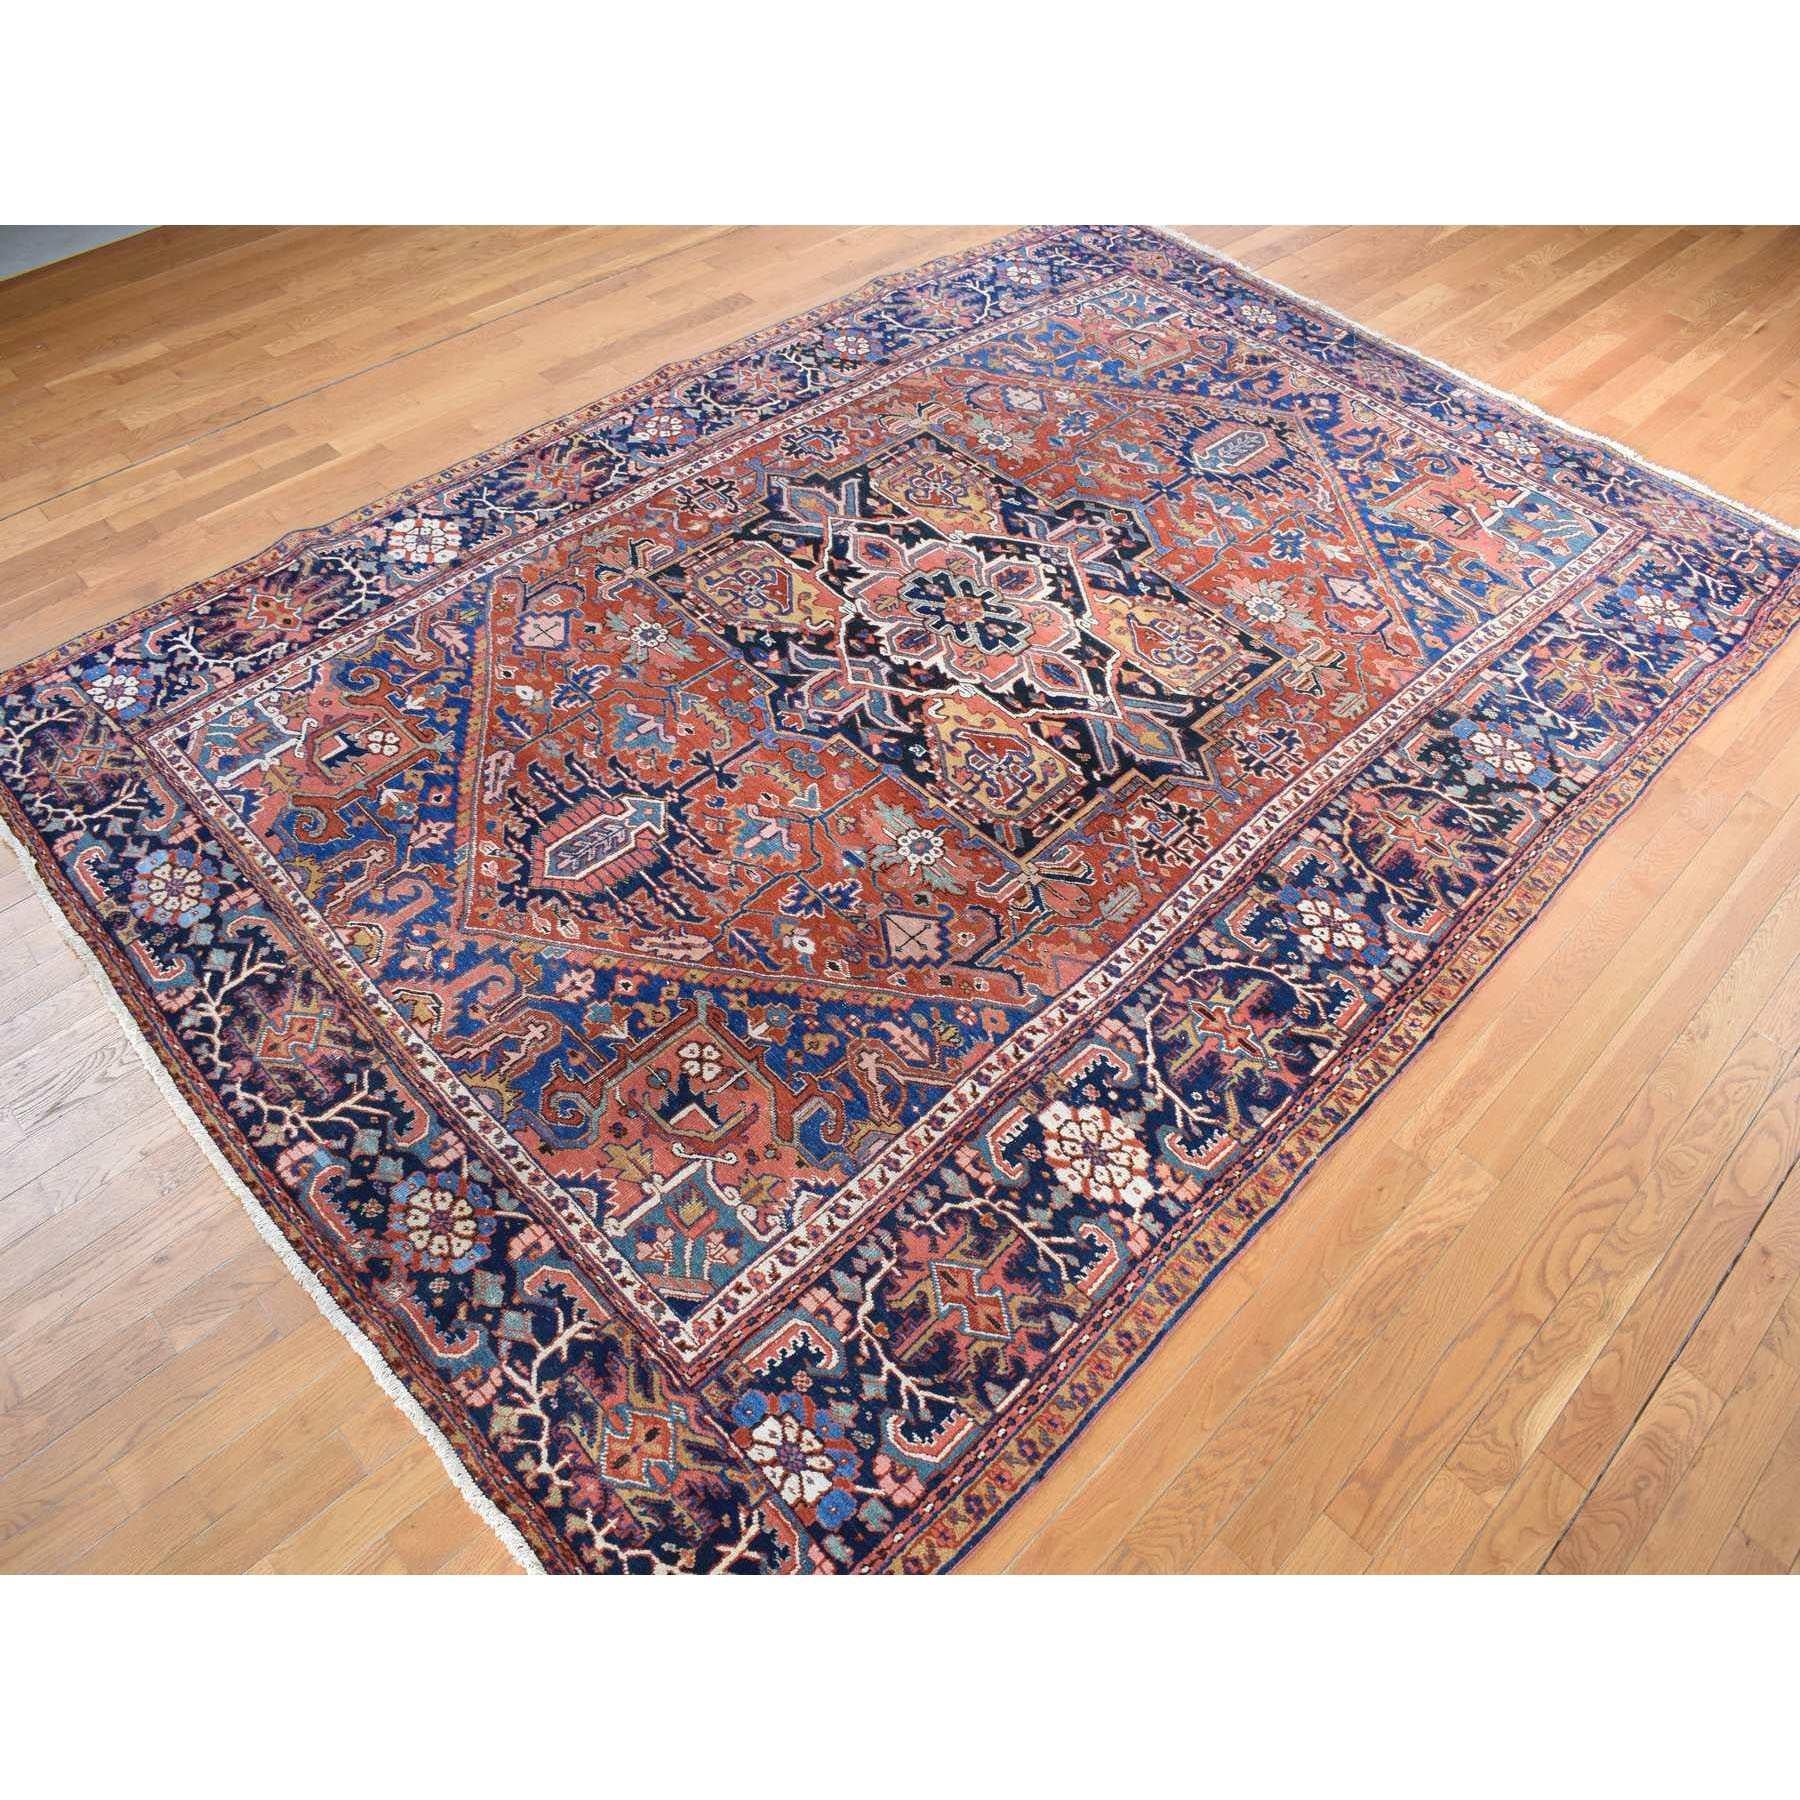 Medieval Red Antique Persian Heris Good Condition Hand Knotted Wool Clean Rug 8'6